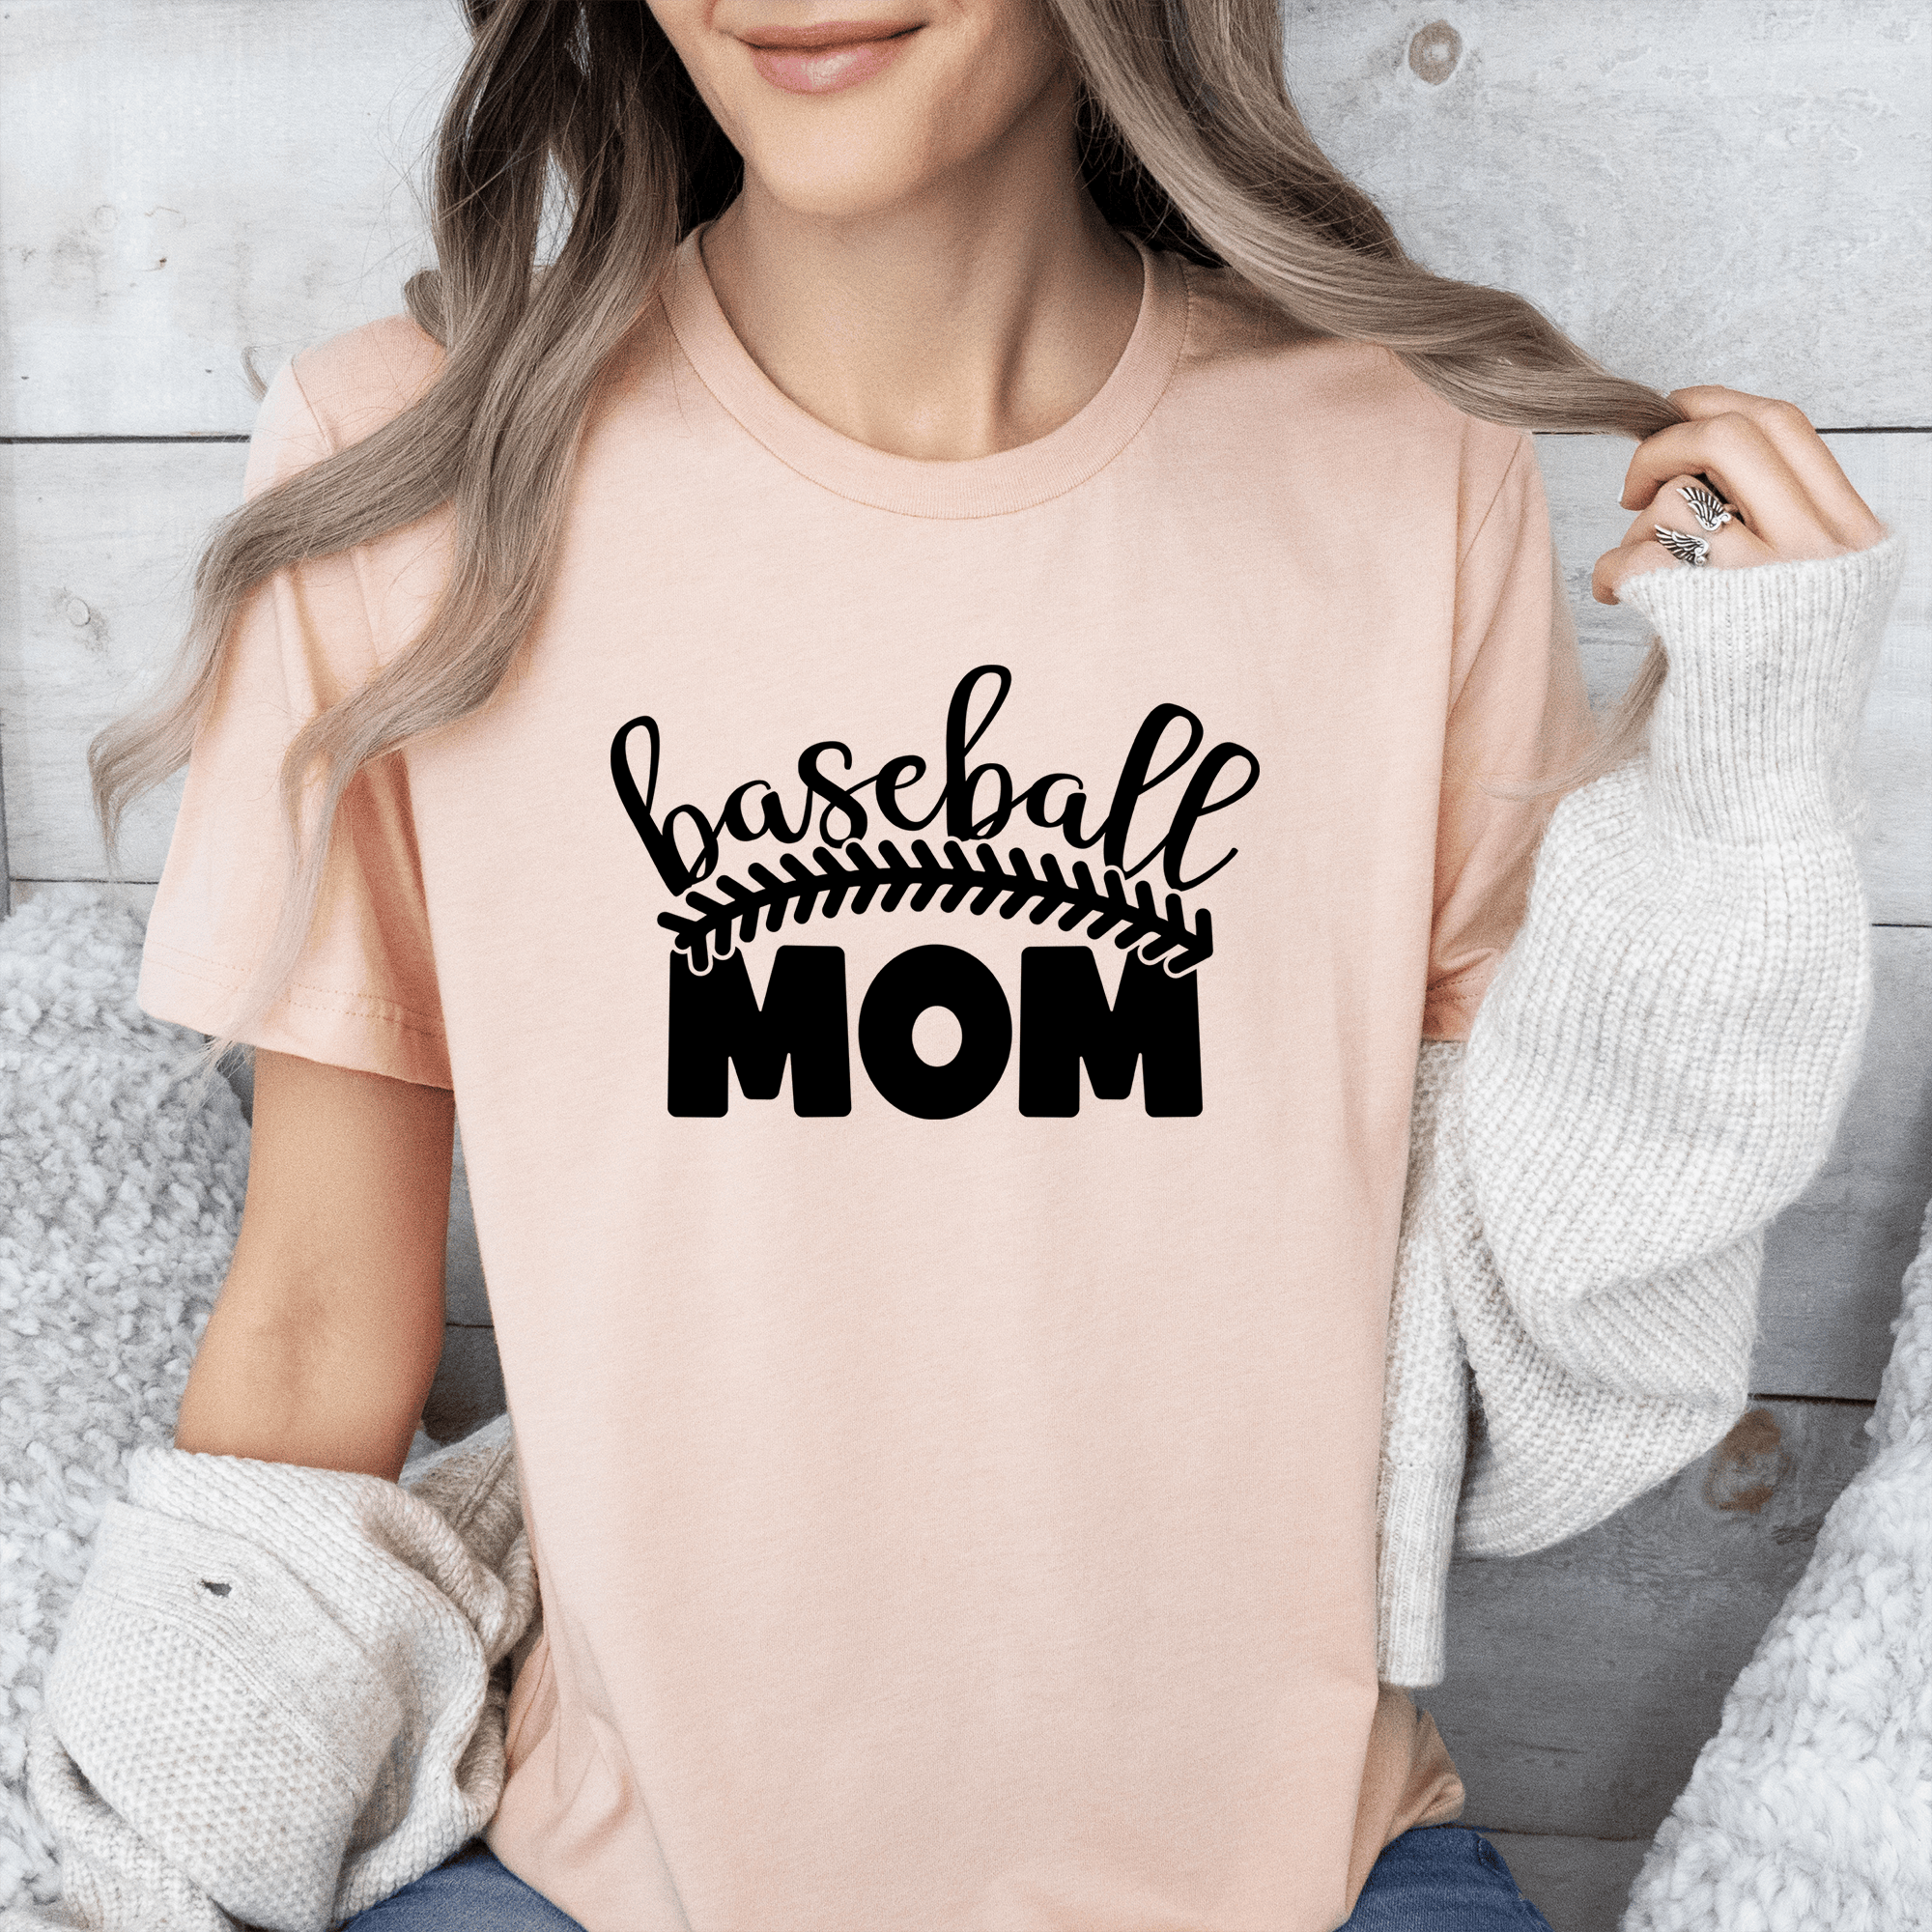 Womens Heather Peach T Shirt with Stitched-Baseball-Mom design